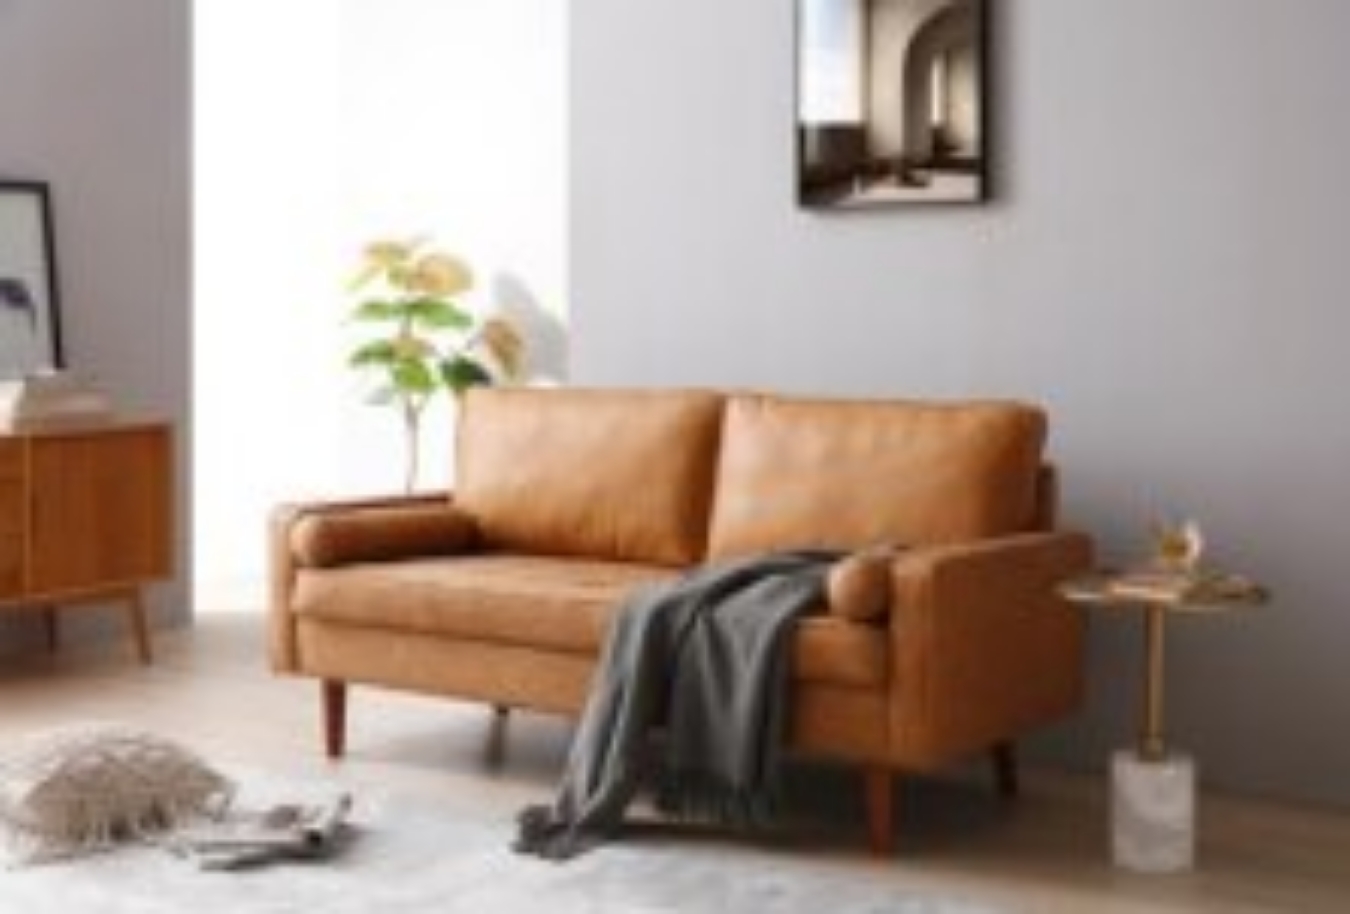 This Coogee 2.5 Seater Faux Leather Sofa - Brown  is a design classic and now you can bring it into your own home with this contemporary take on the retro design. 